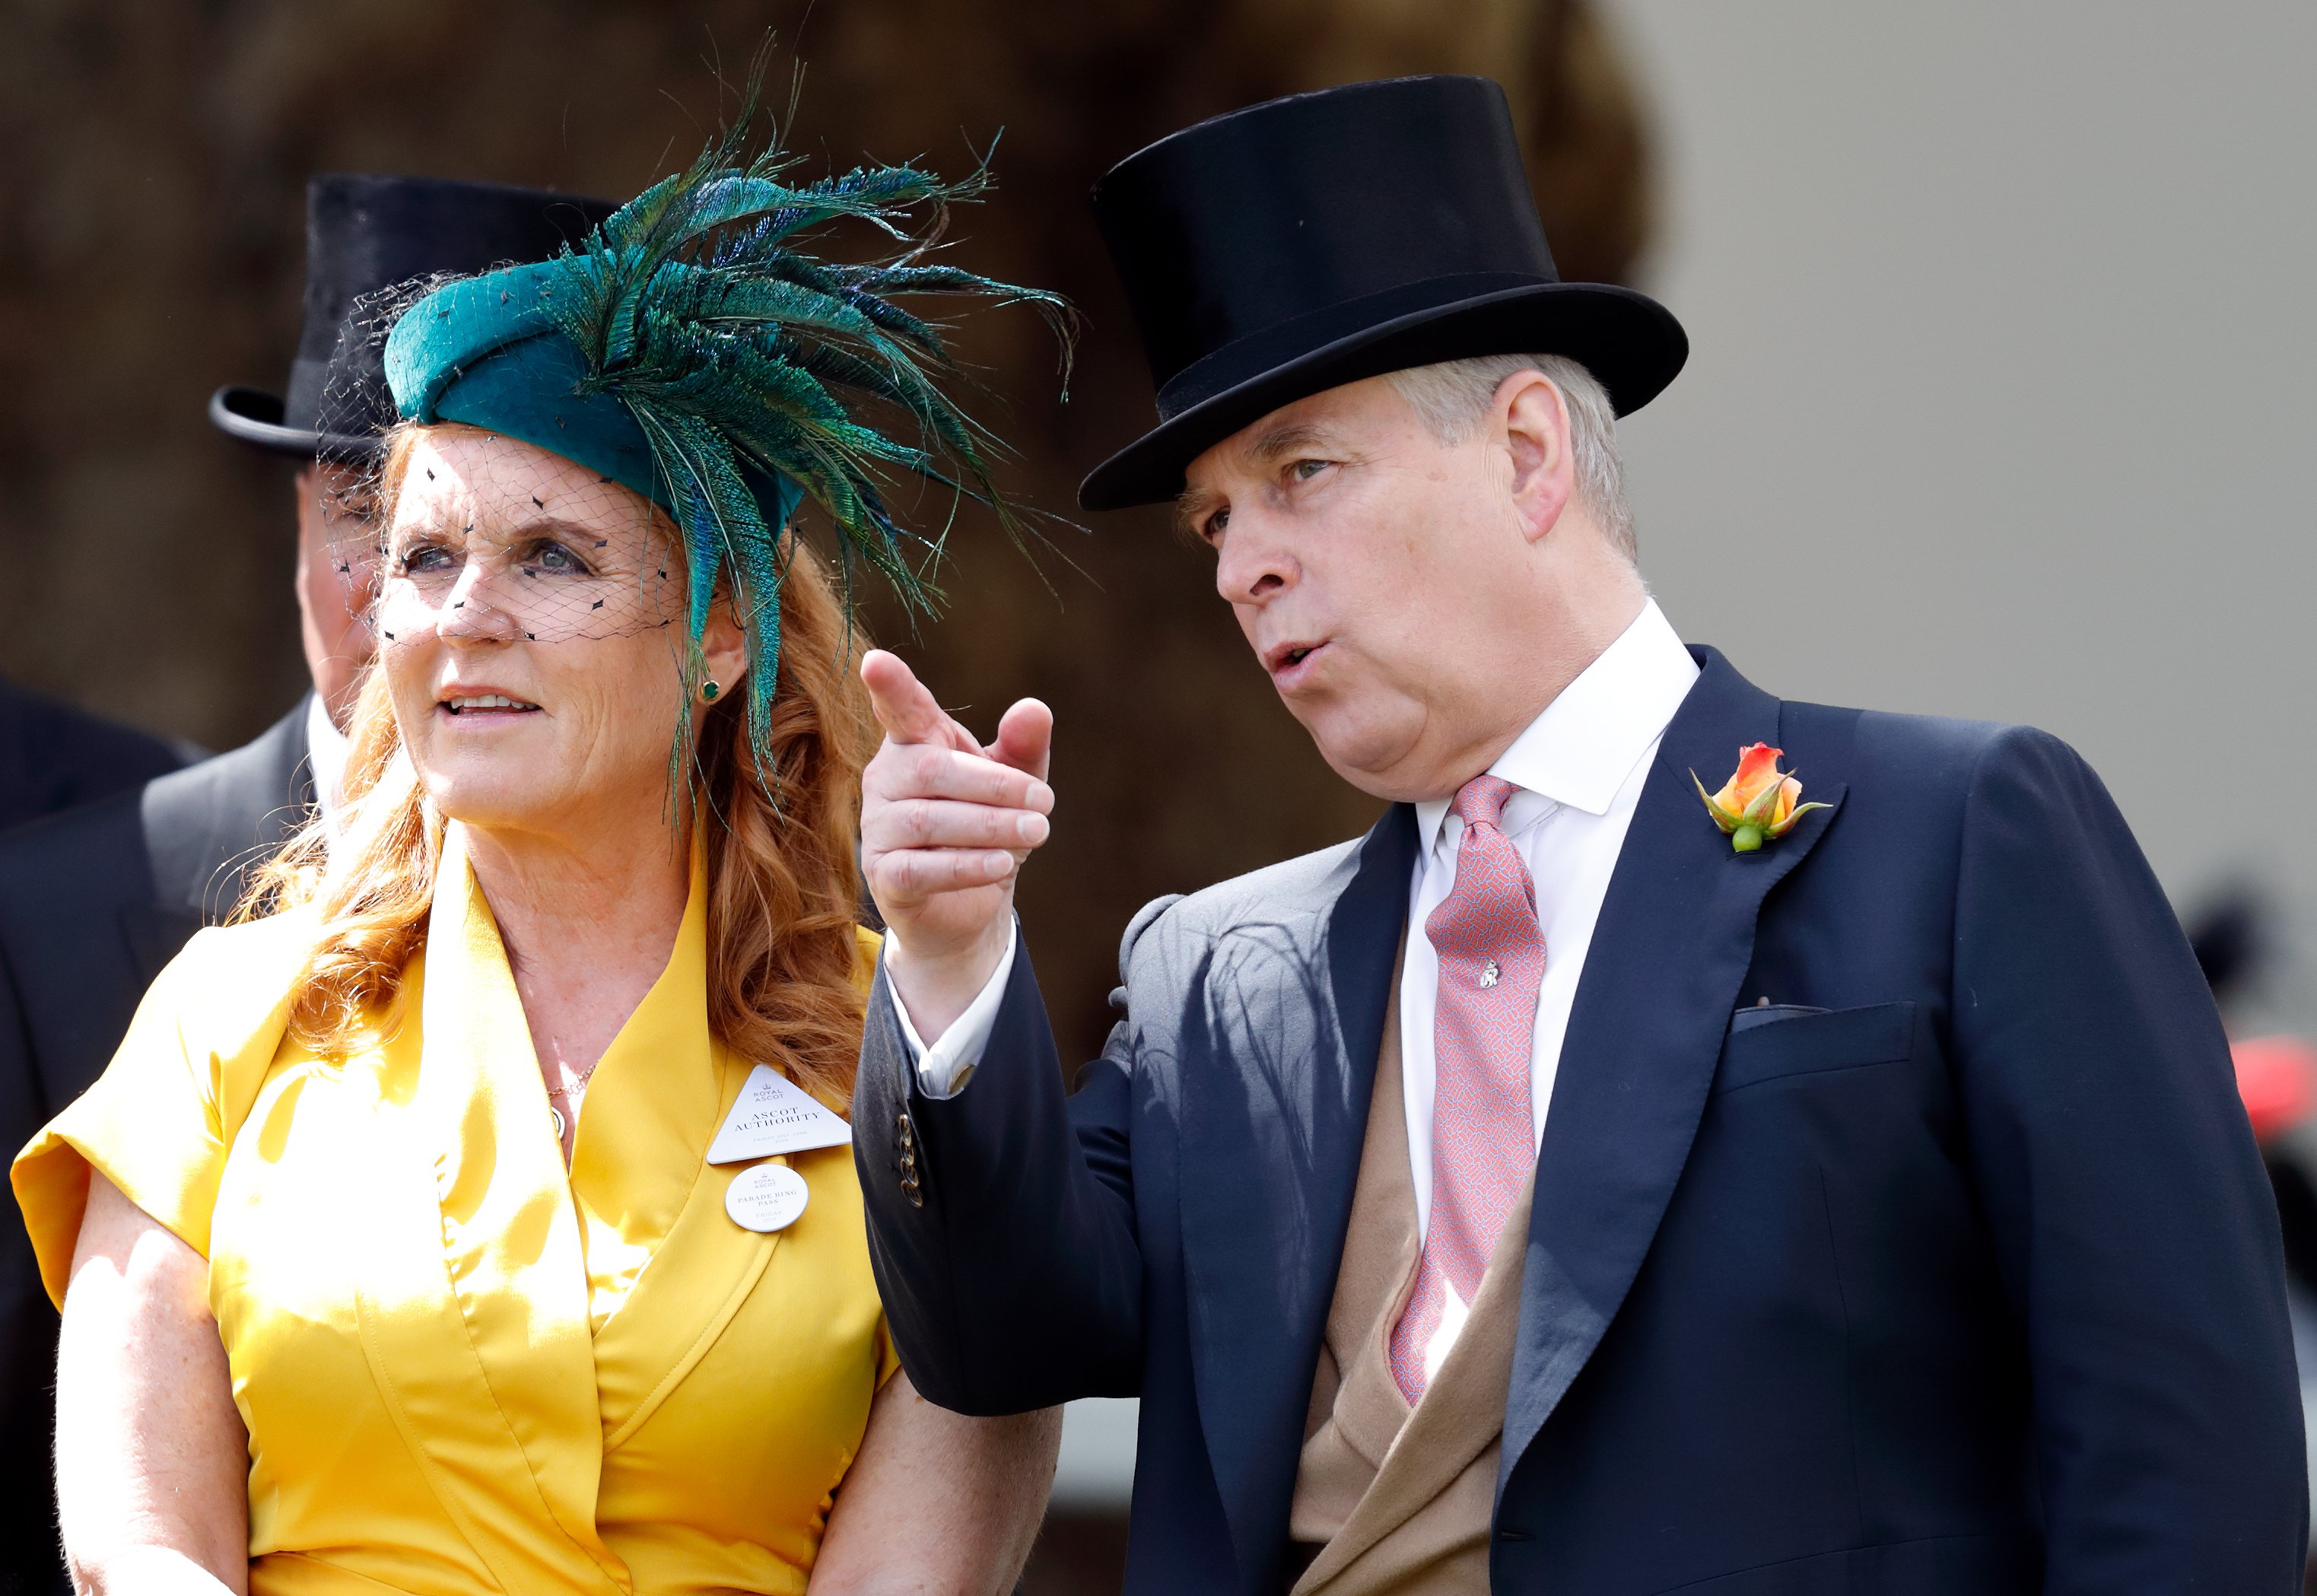 Sarah Ferguson, Duchess of York and Prince Andrew, Duke of York attend day four of Royal Ascot at Ascot Racecourse on June 21, 2019. in Ascot, England. | Source: Getty Images